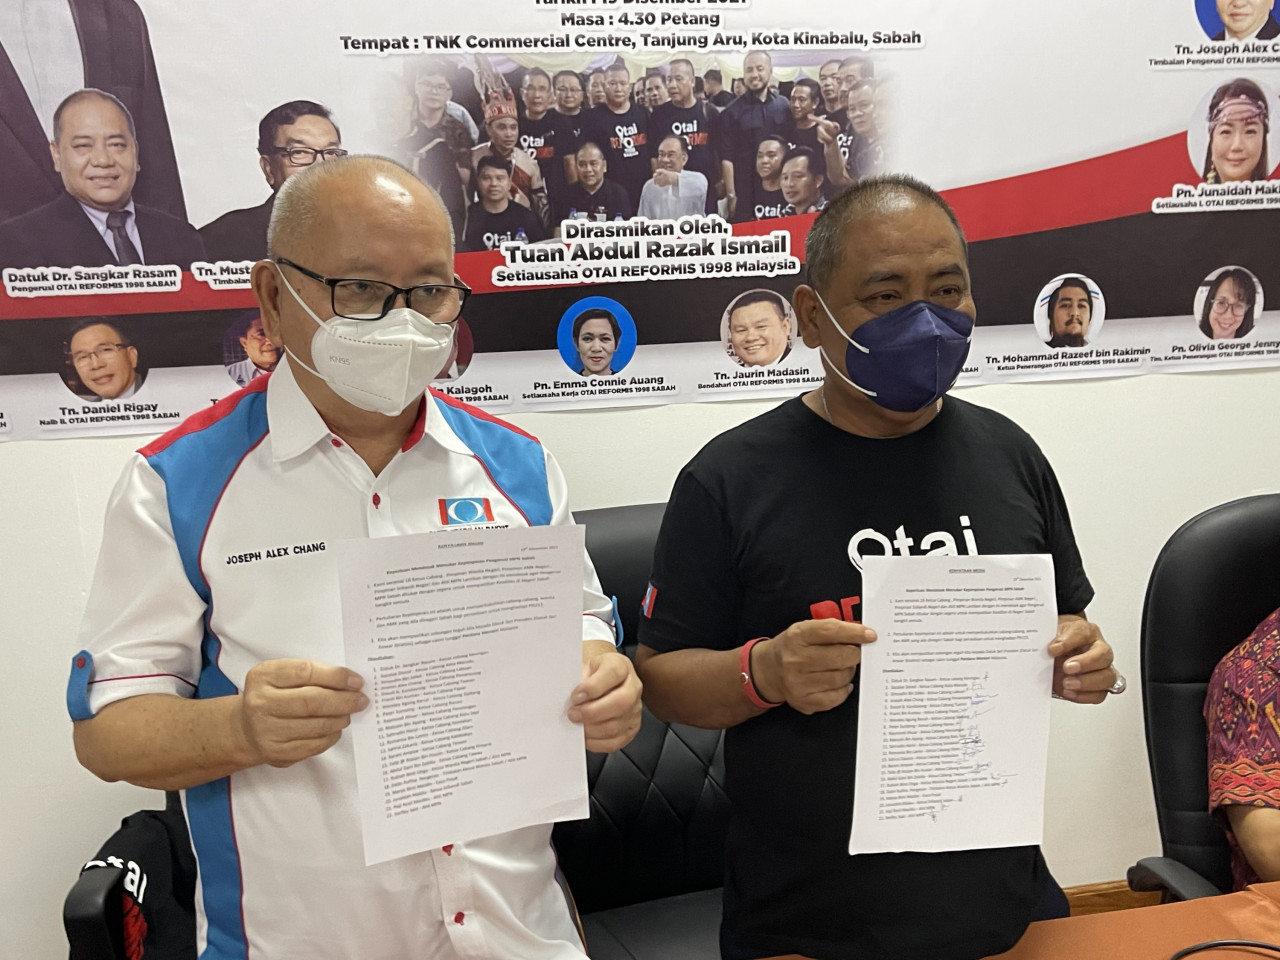 Sabah PKR Keningau division chief Datuk Dr Sangkar Rasam (right) notes a leadership change in the party is needed to strengthen the state chapter in facing the forthcoming 15th general election. – The Vibes file pic, December 19, 2021